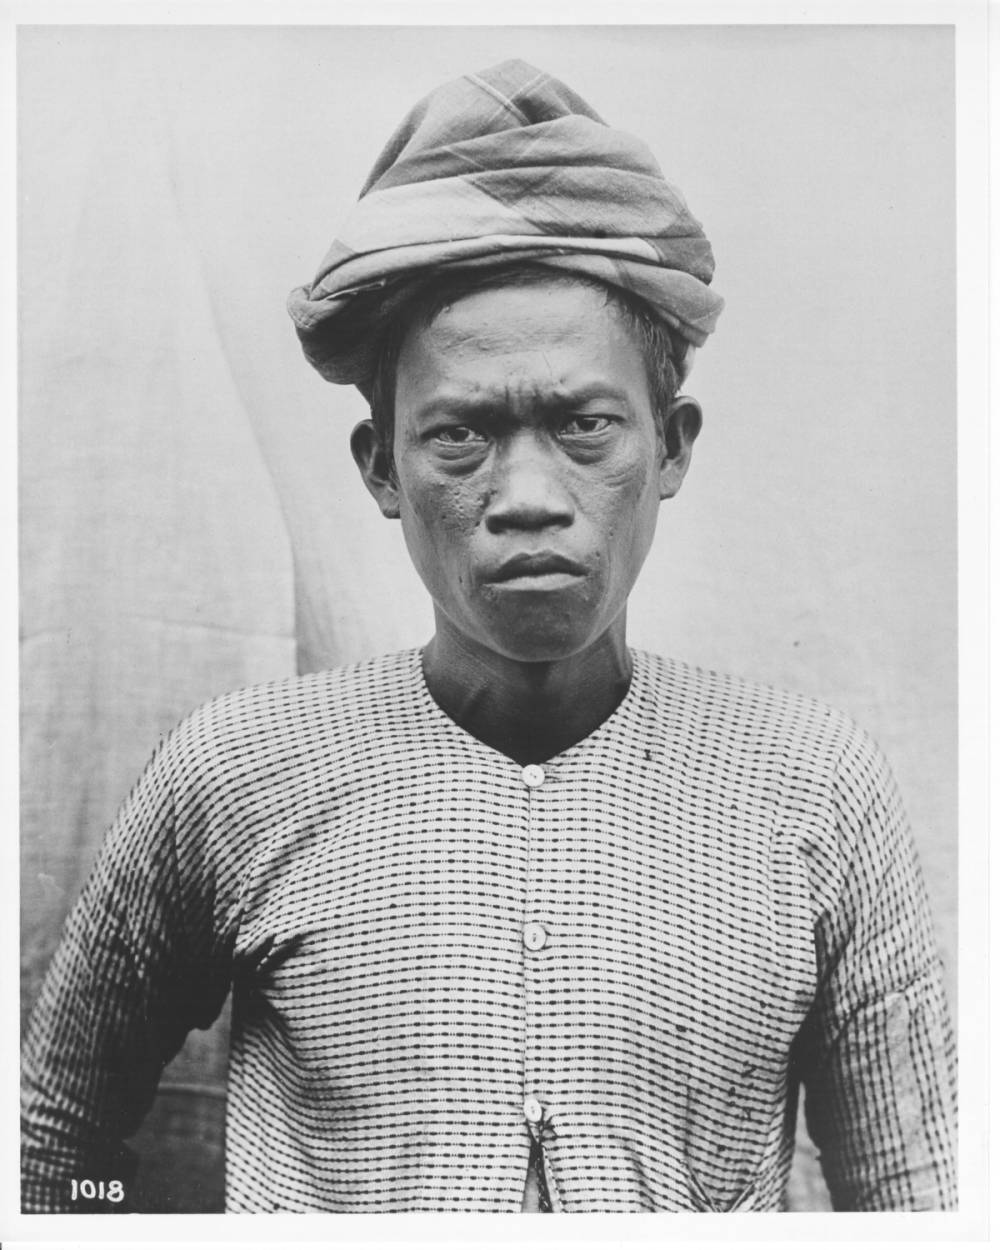 <p>Portrait photograph of a Moro man. Number 1018: The number ‘1018’ is written at the lower left-hand corner of the photograph.</p>
